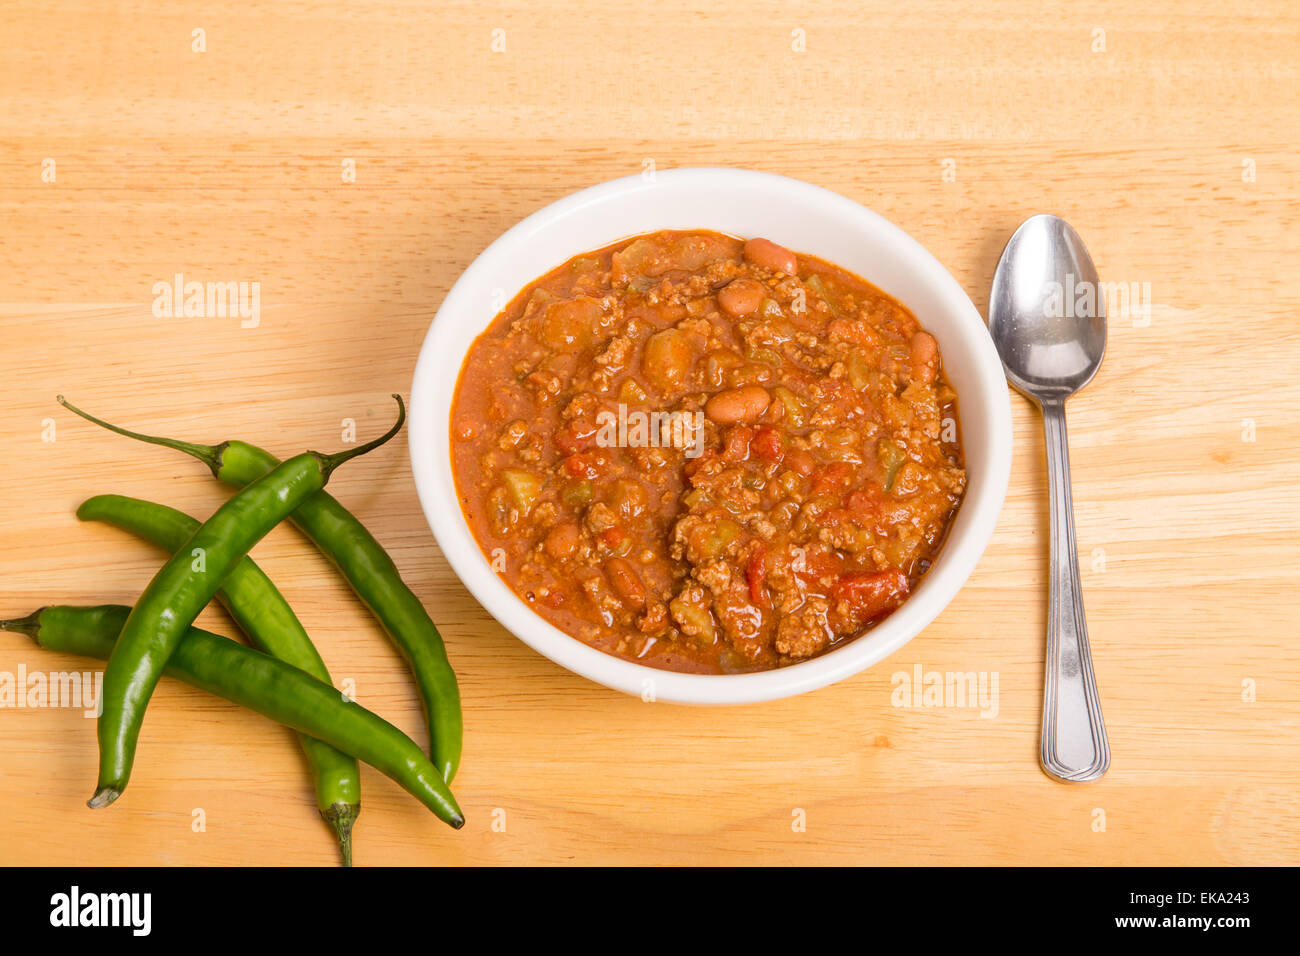 A bowl of chili con carne with beans and green chili peppers Stock Photo